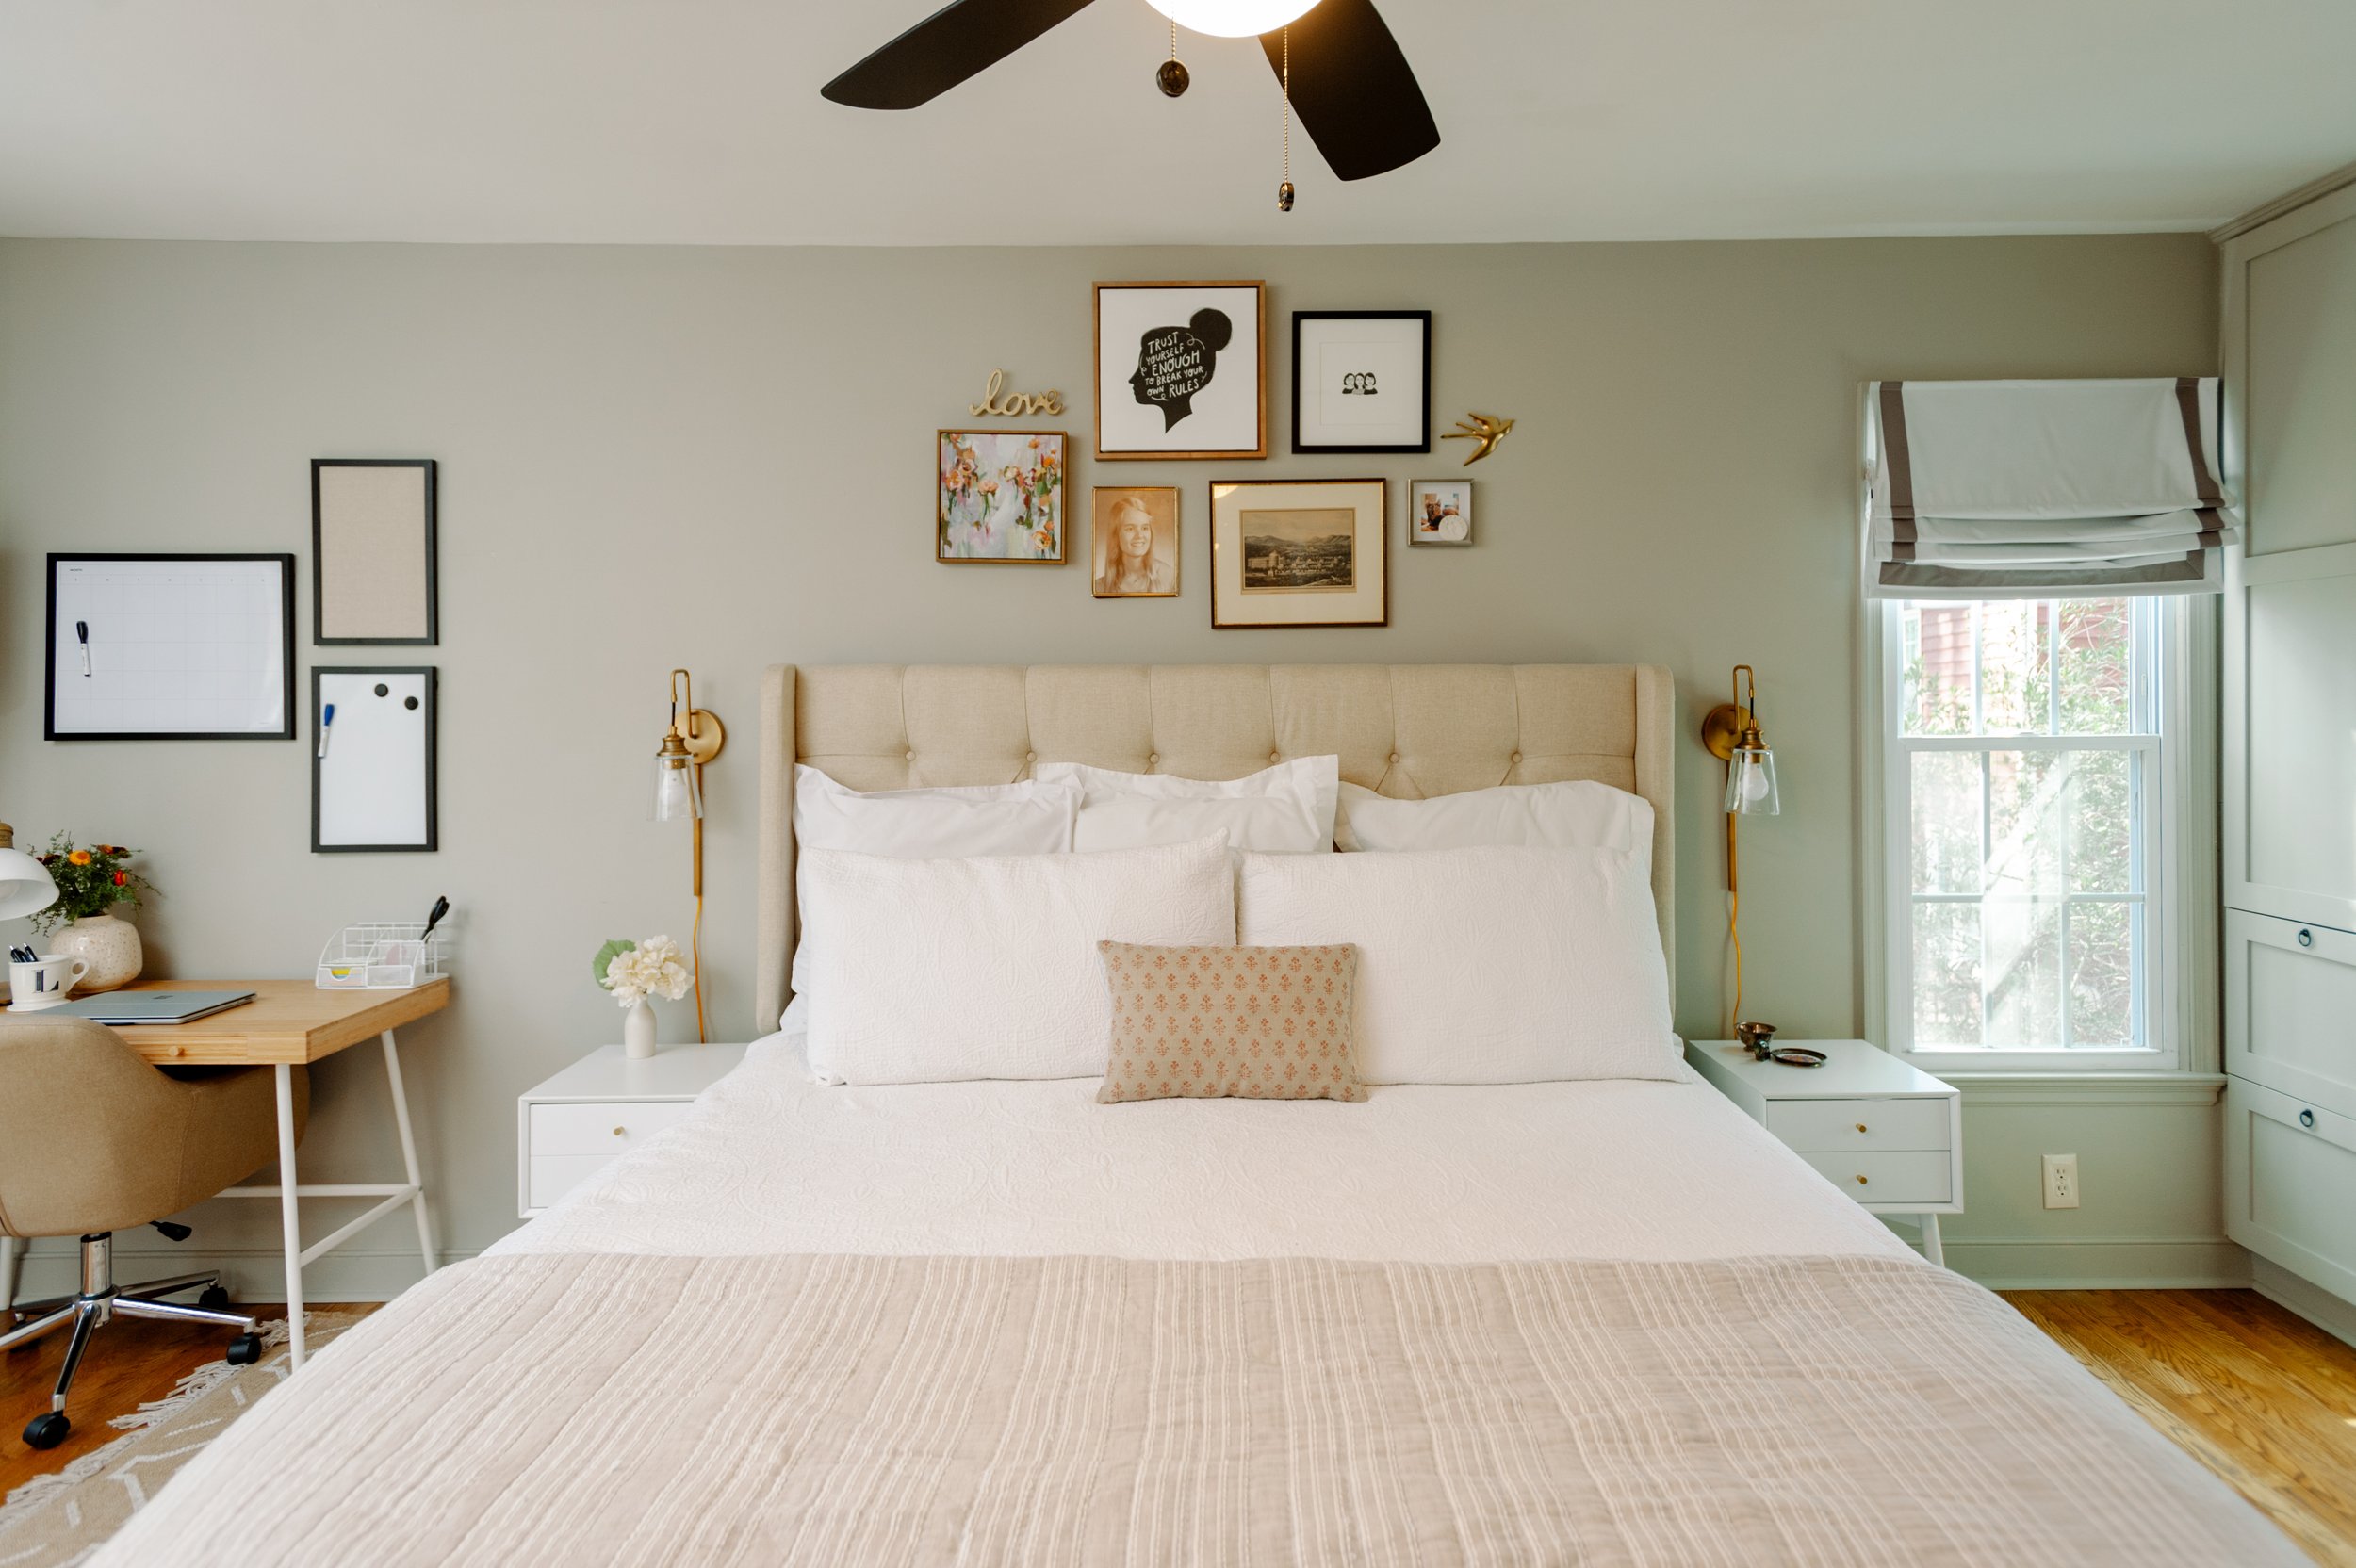 Beige Upholstered Headboard in Sherwin Williams Mindful Gray with Gallery Wall and Studio McGee Pillow; Brass Plug-In Sconces from Wayfair and Target Bedding